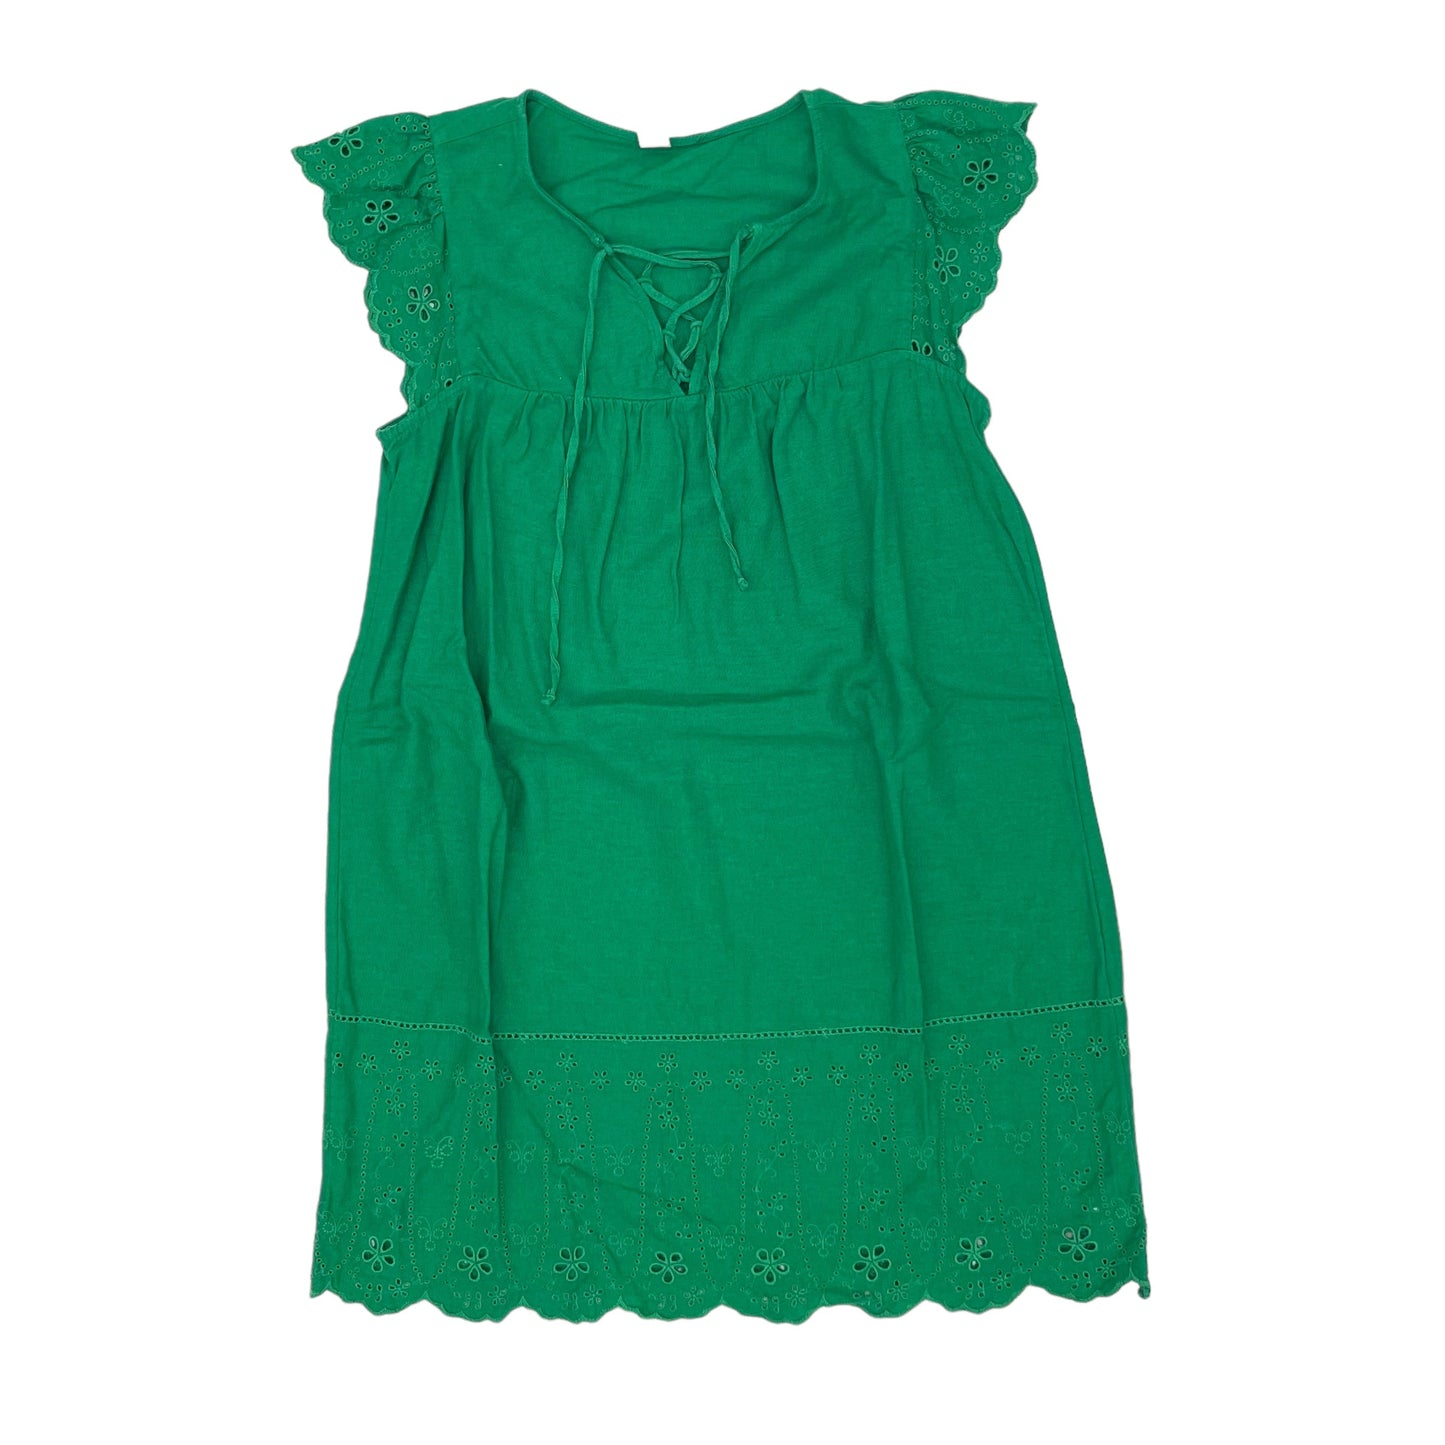 GREEN OLD NAVY DRESS CASUAL SHORT, Size M